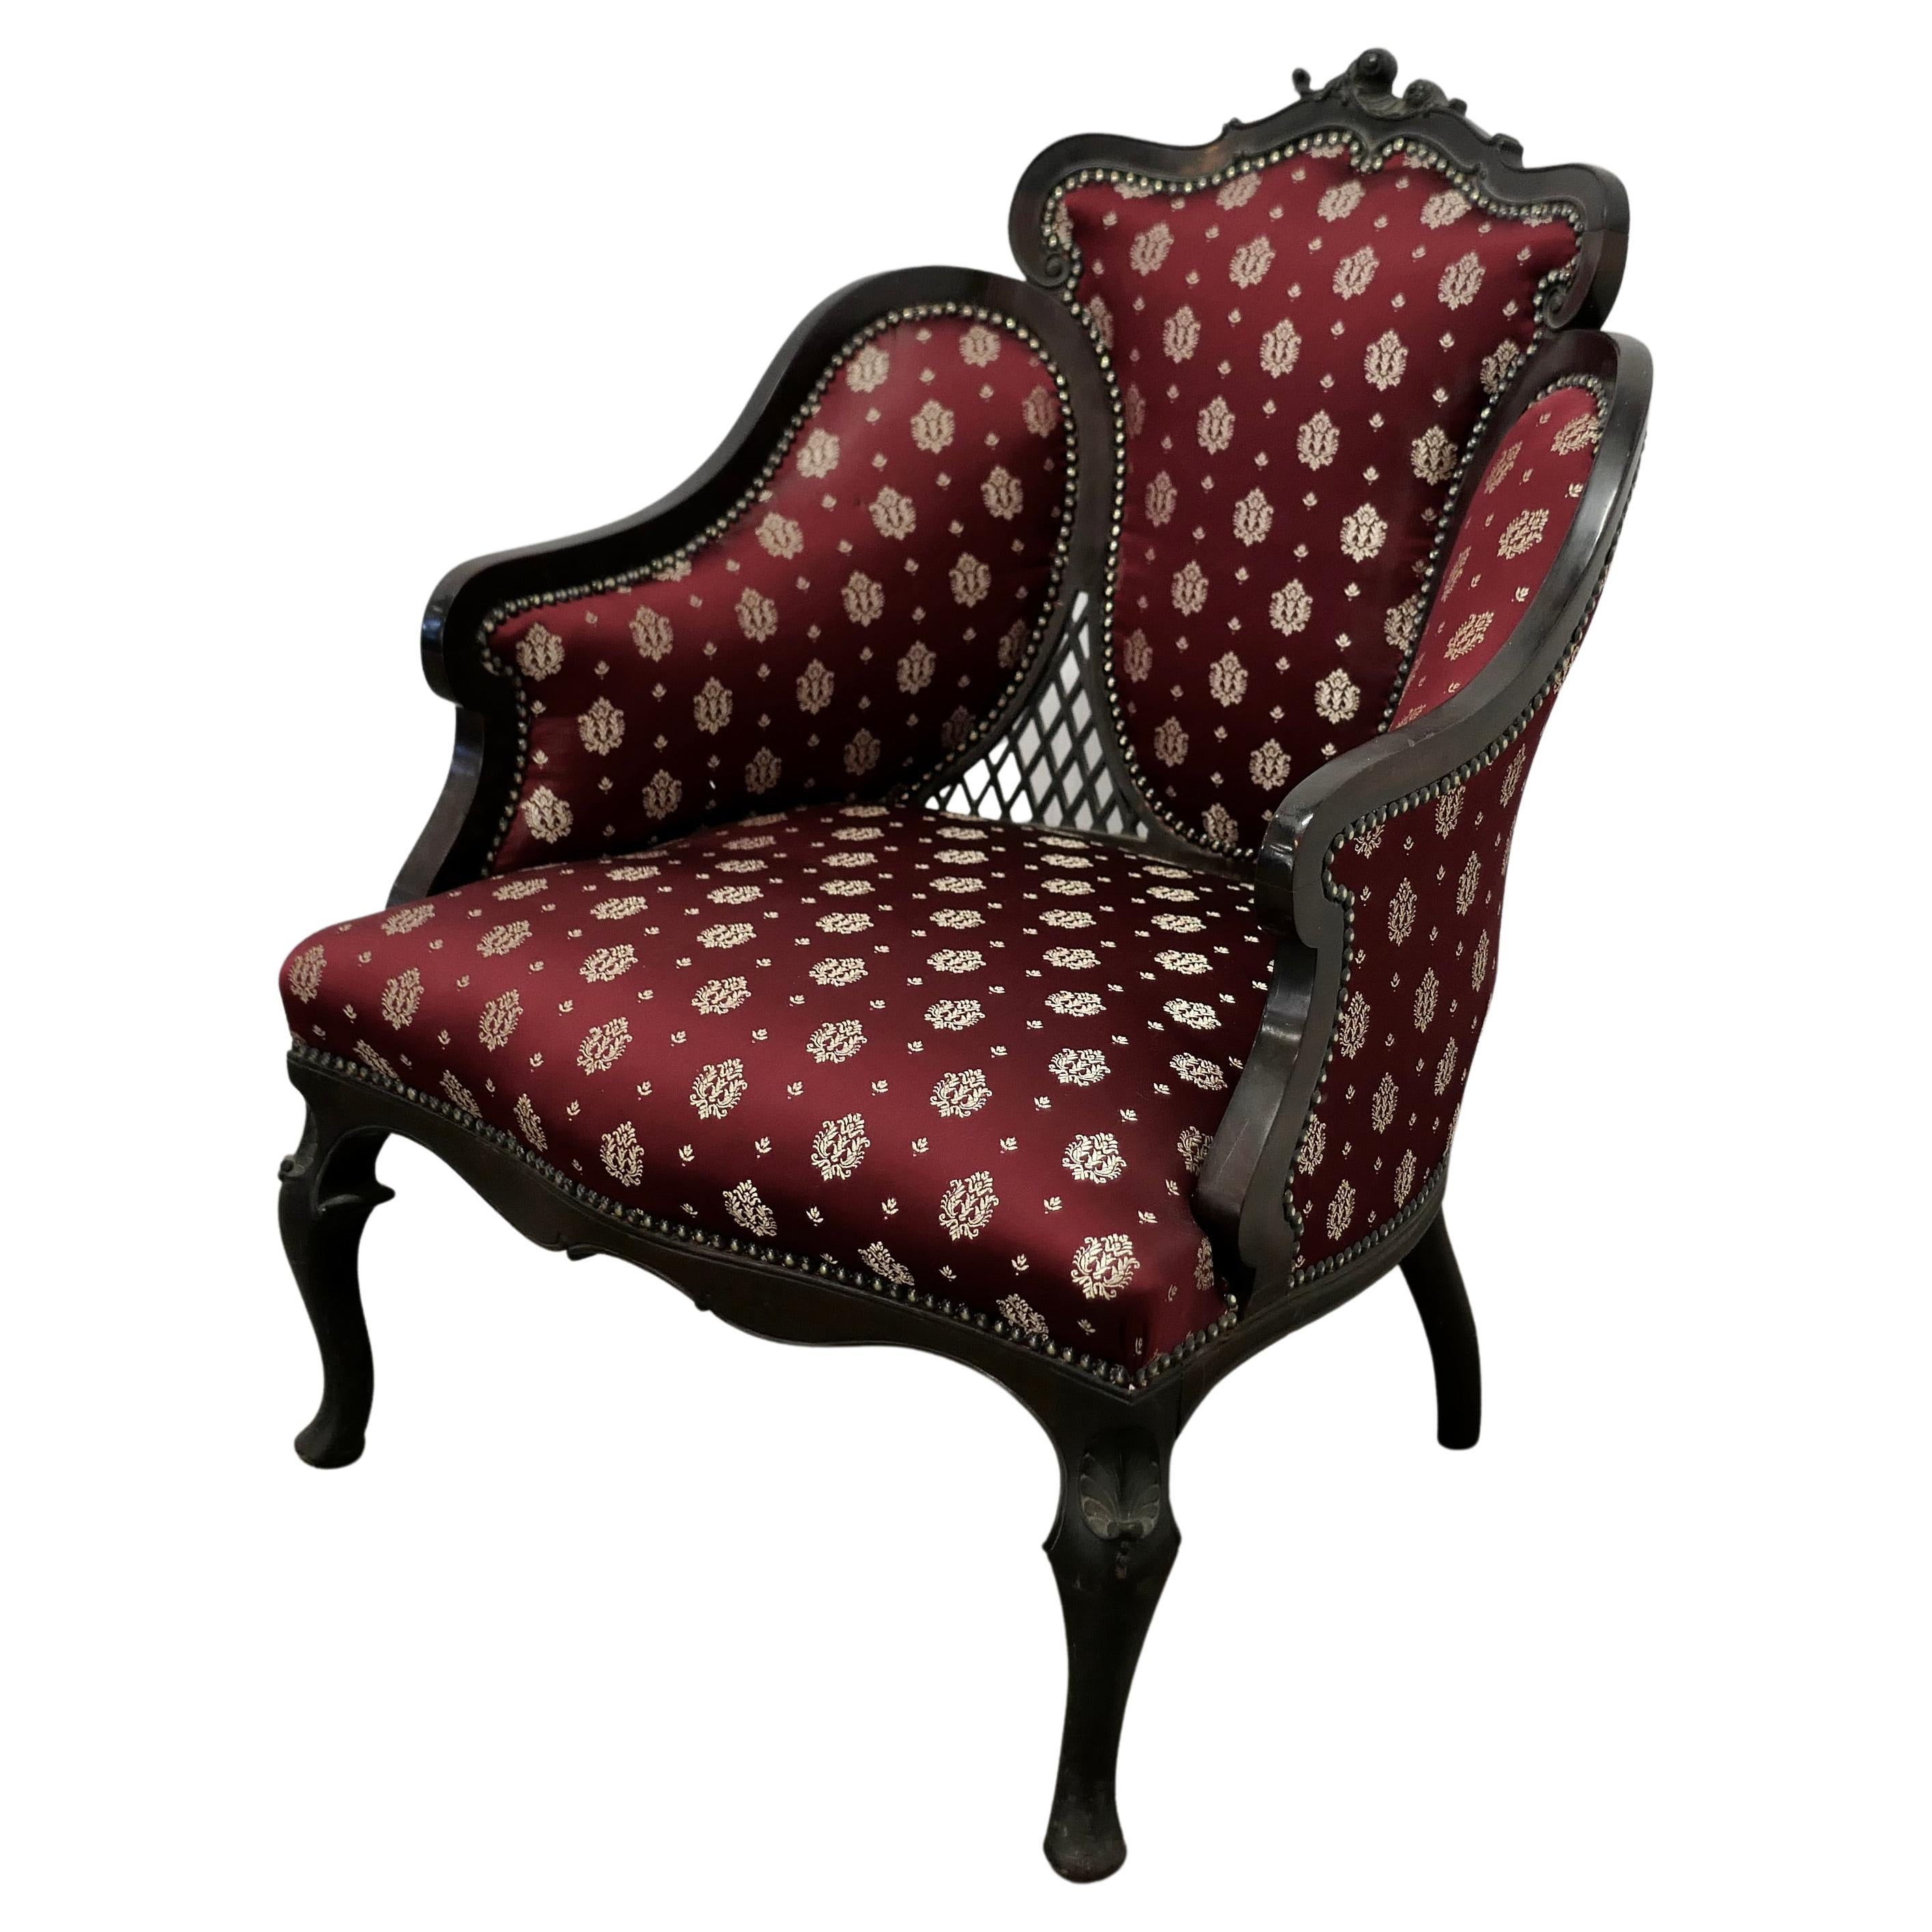 Fine Quality Victorian Salon Chair, Upholstered in Regency Silk Fabric   